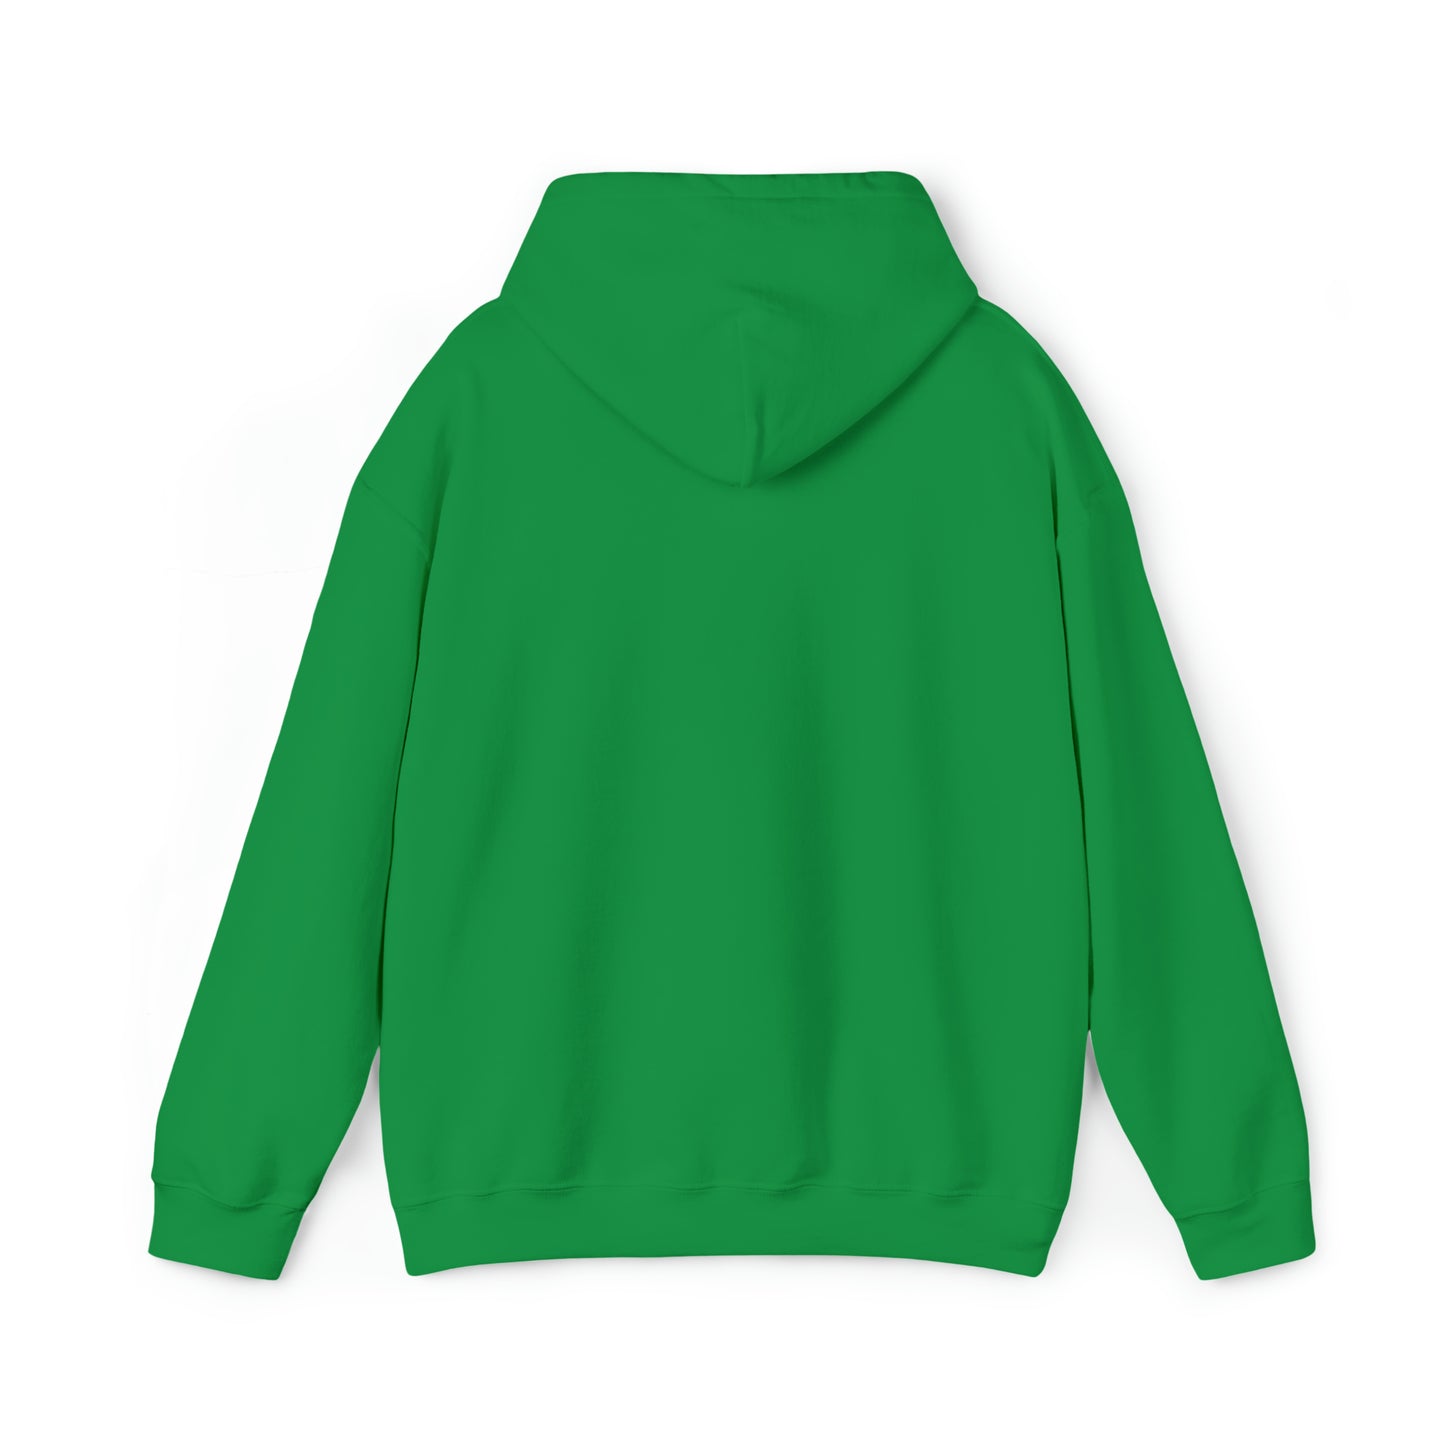 Grumpy and Proud: The Bold Hooded Sweatshirt for Seniors with Attitude